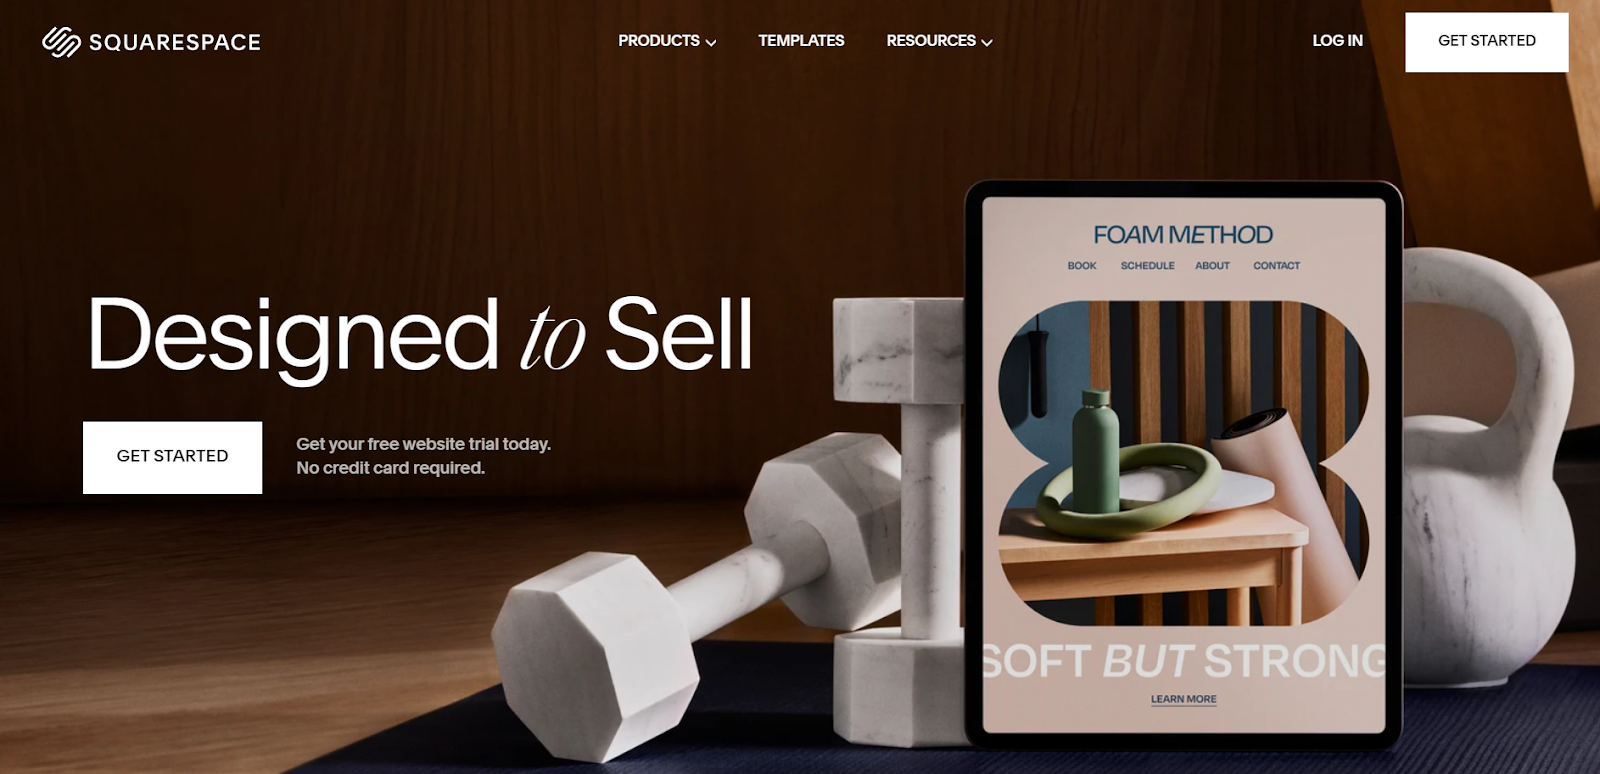 squarespace ecommerce website builder with seo